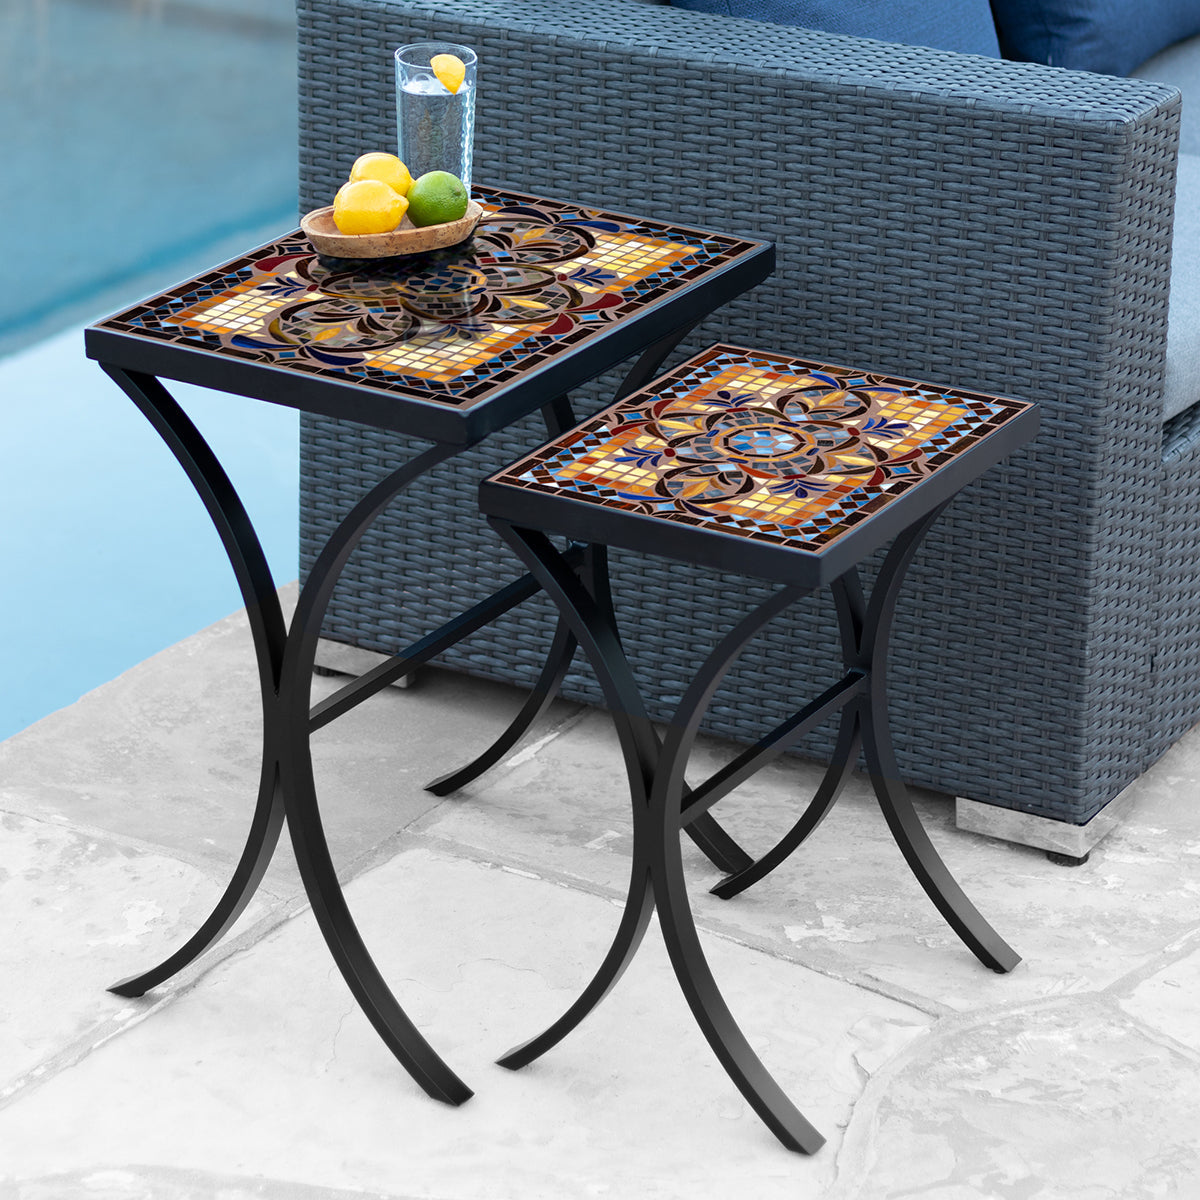 Almirante Mosaic Nesting Tables-Iron Accents